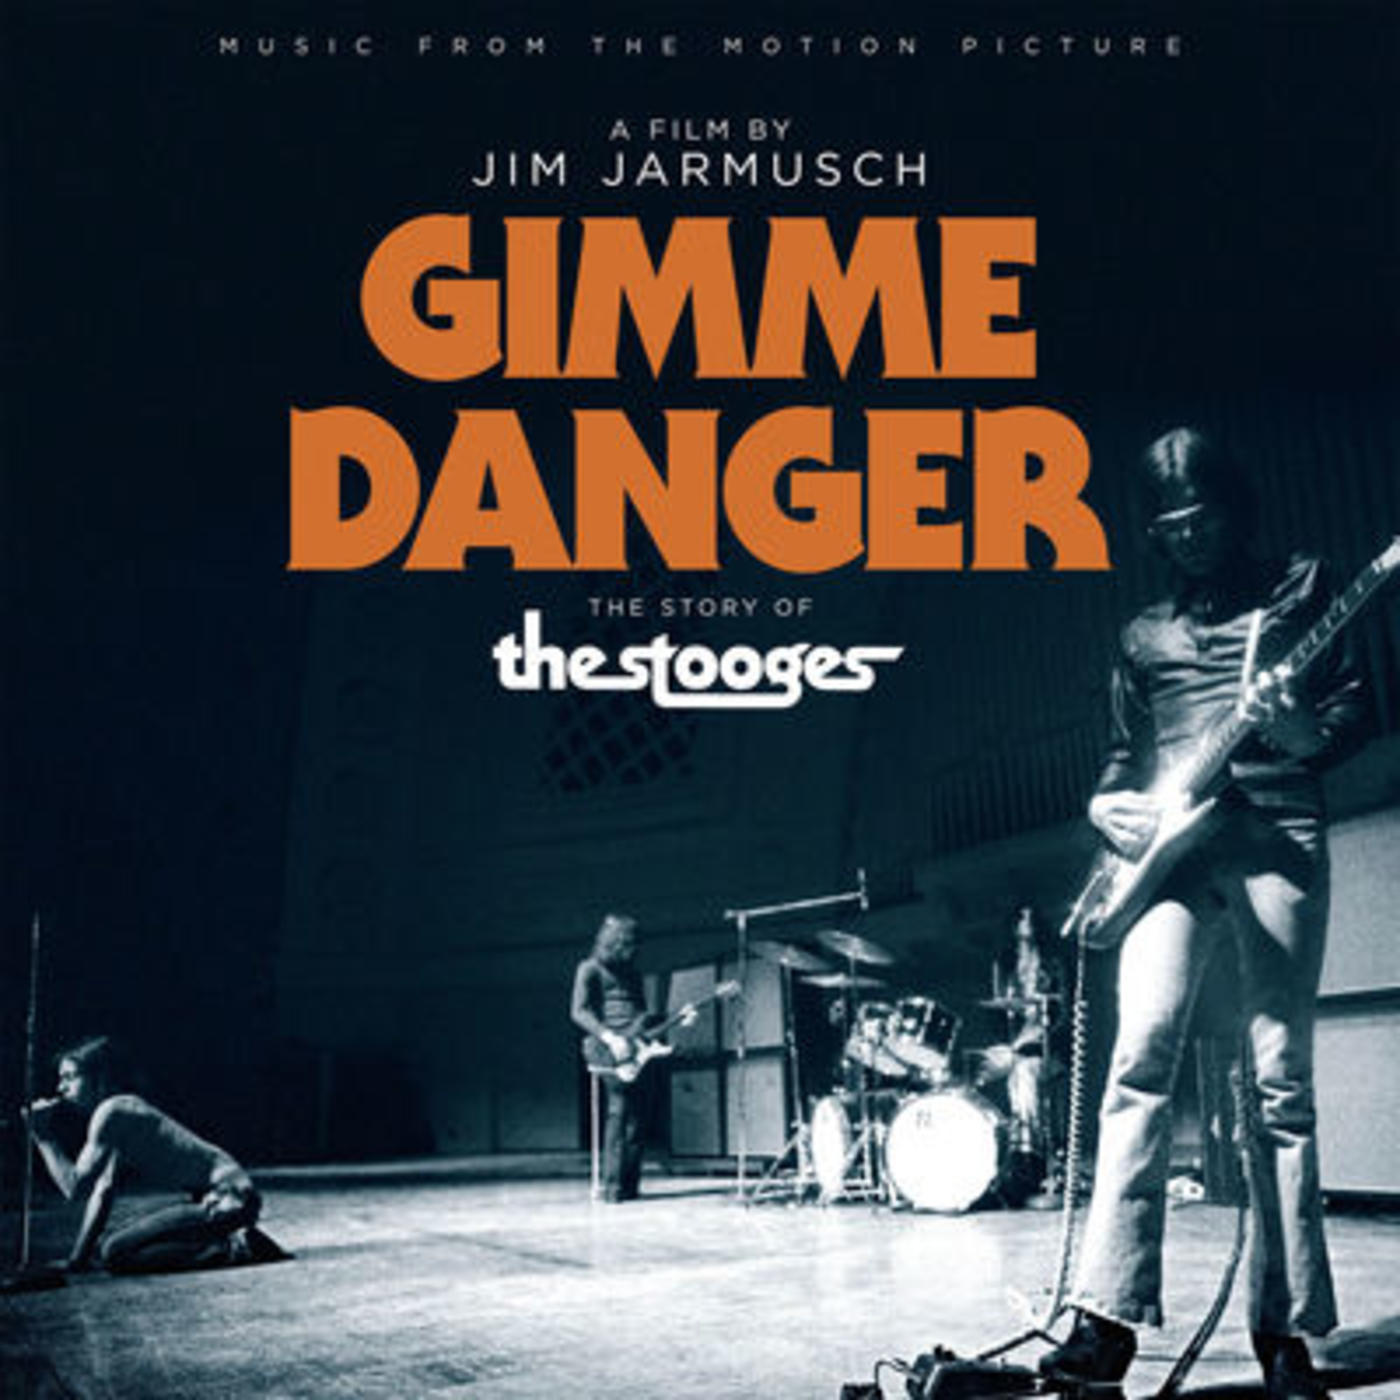 GIMME DANGER: MUSIC FROM THE MOTION PICTURE